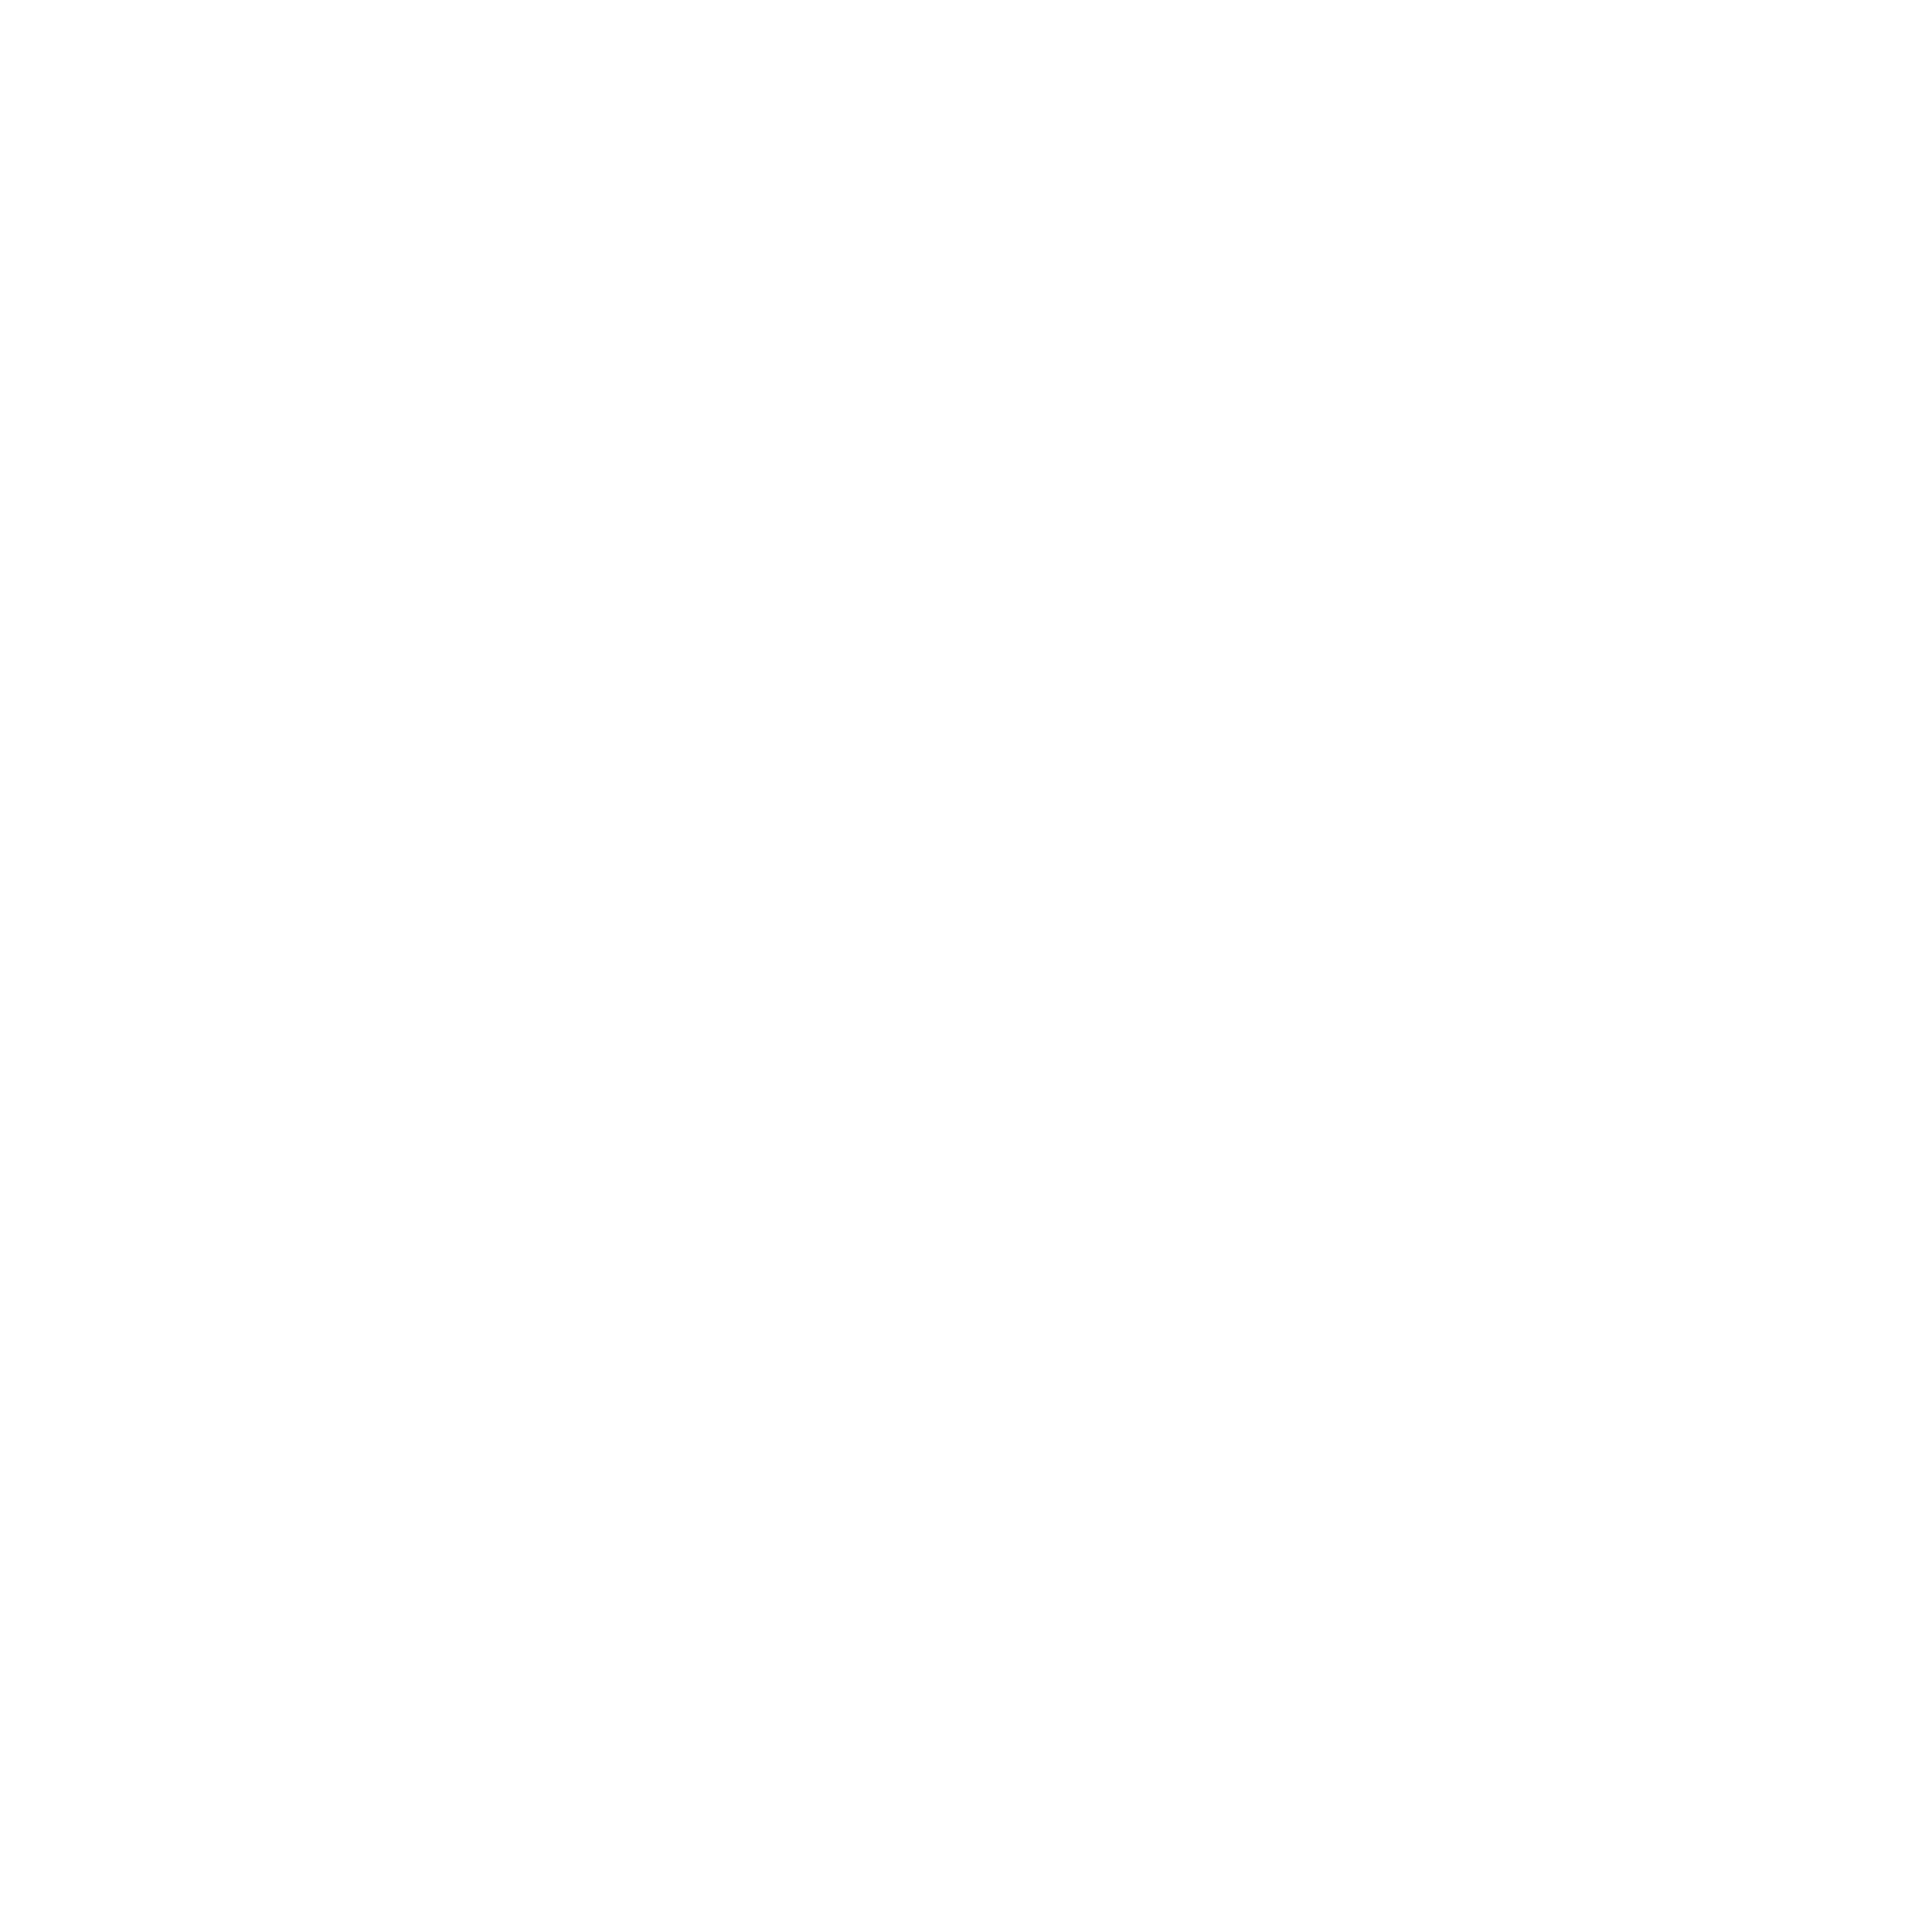 stats about land stewardship practices